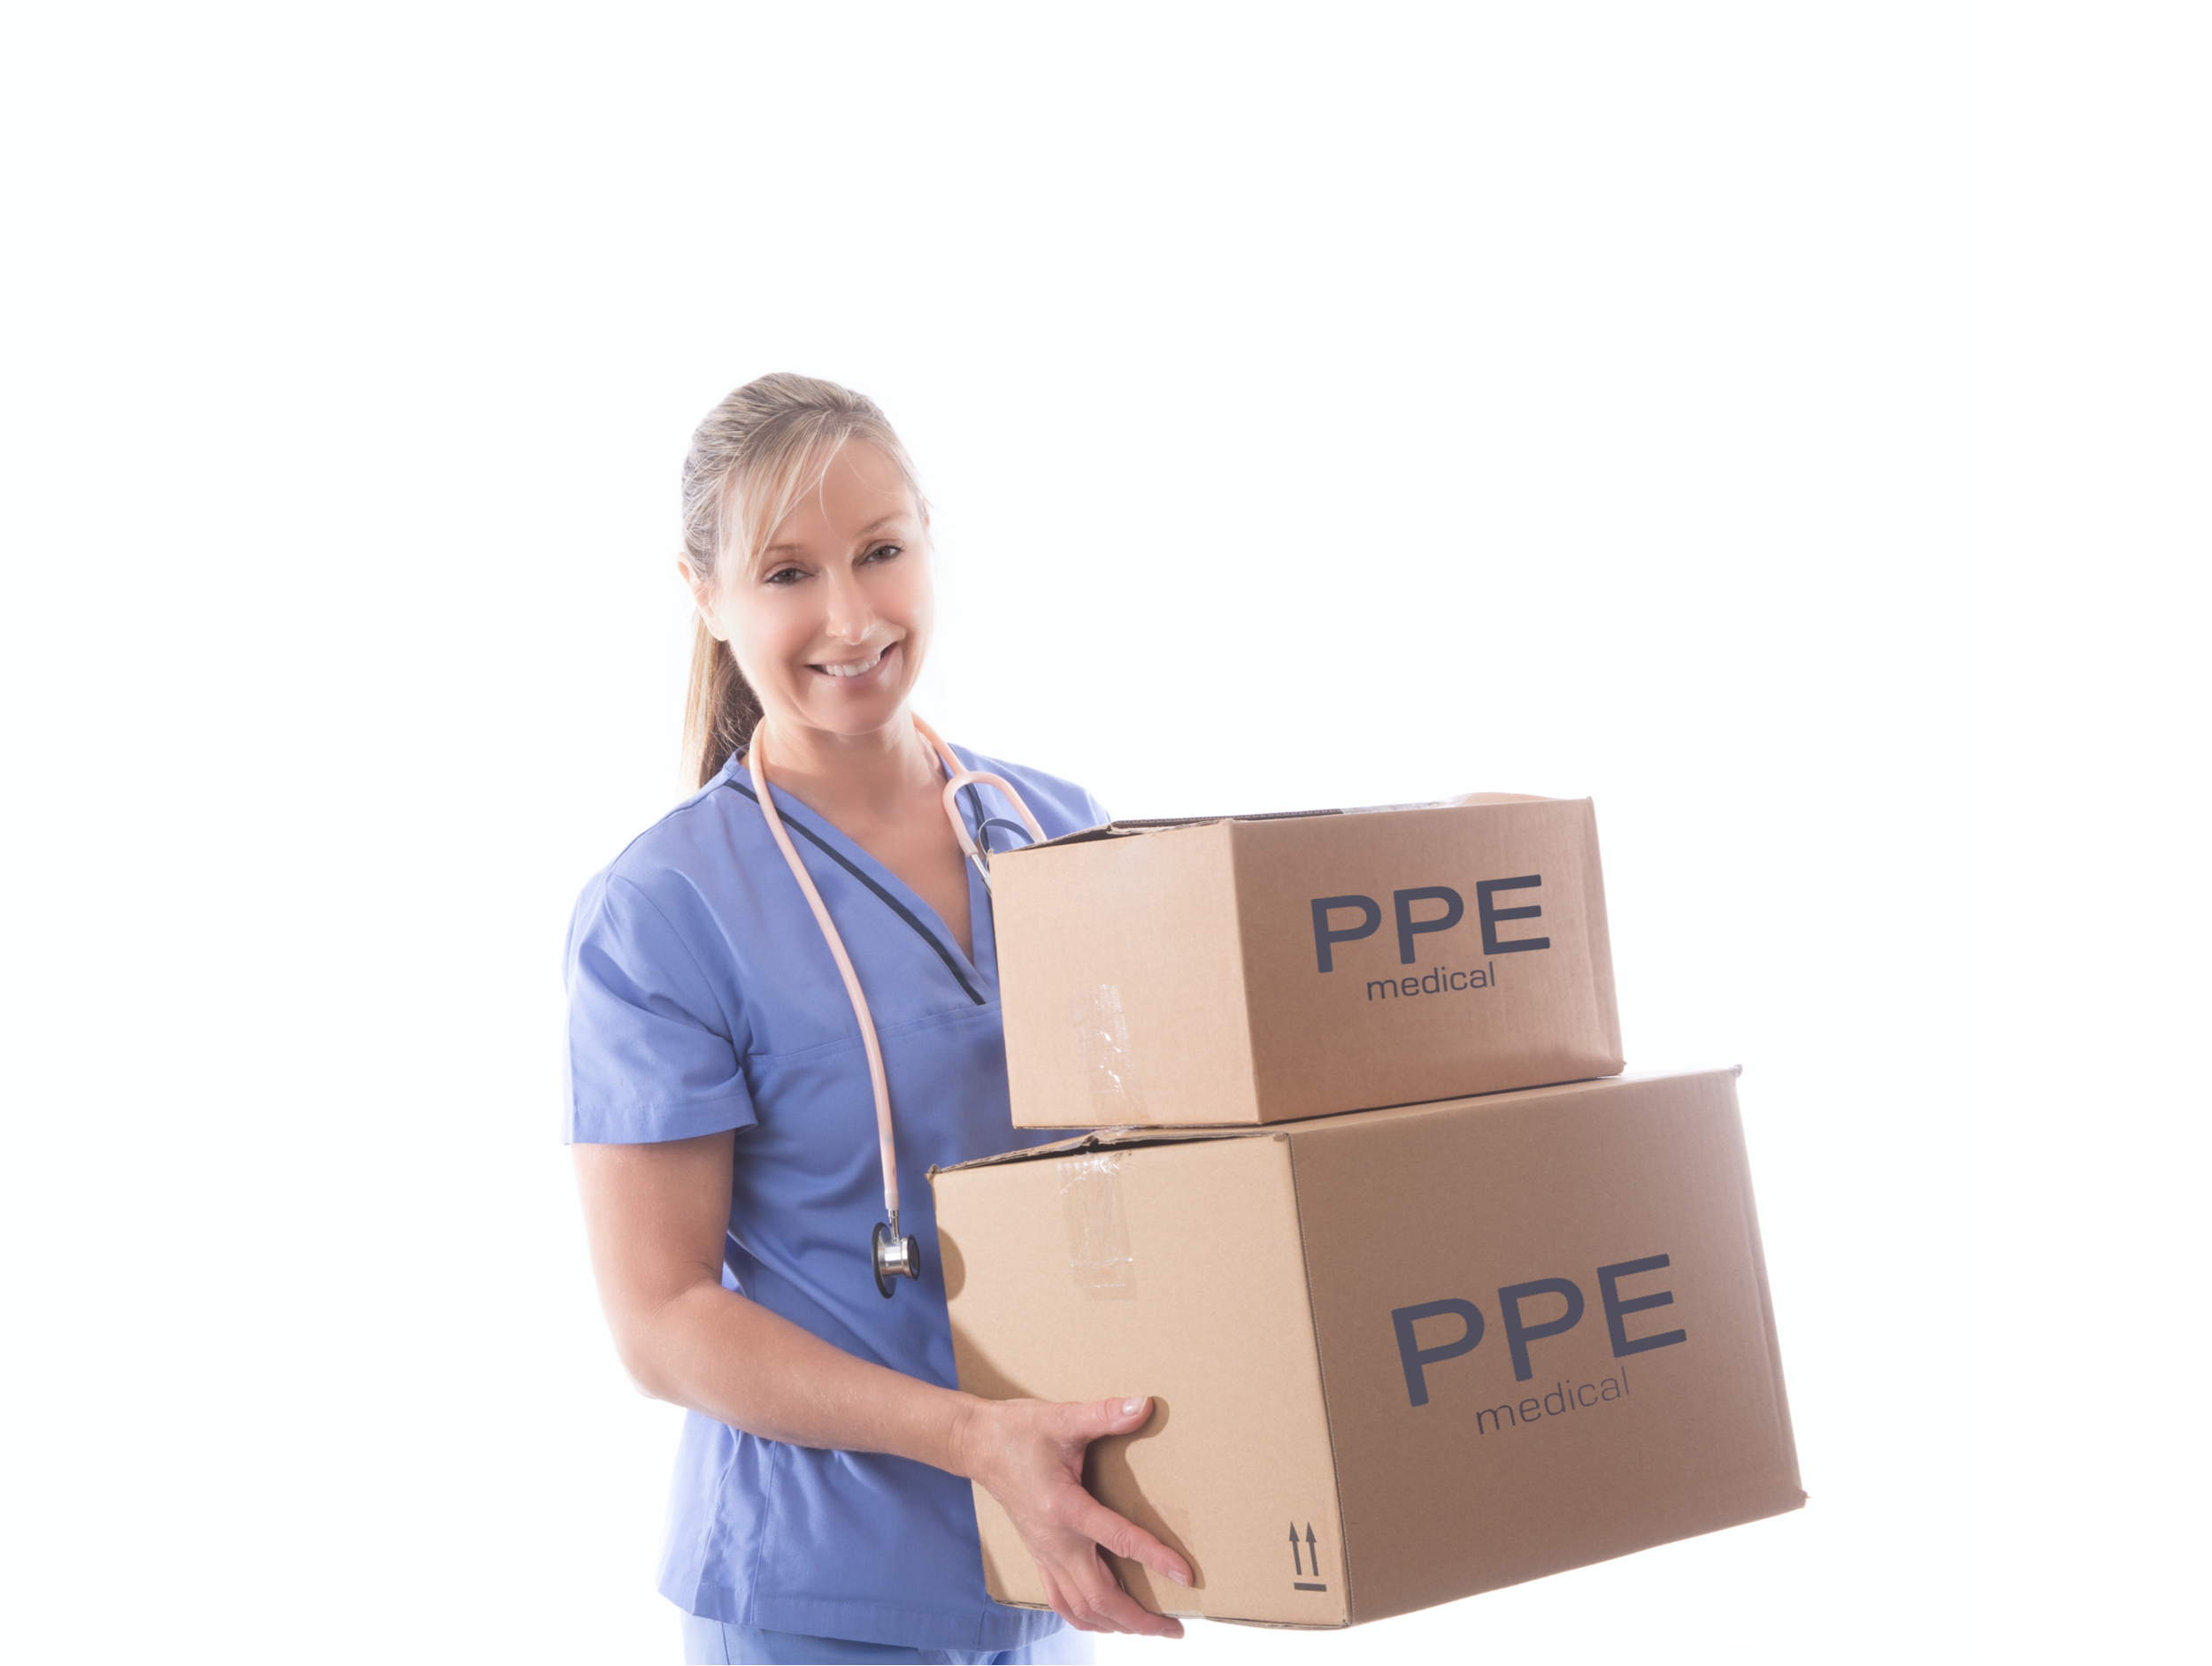 Where to Purchase PPE Products